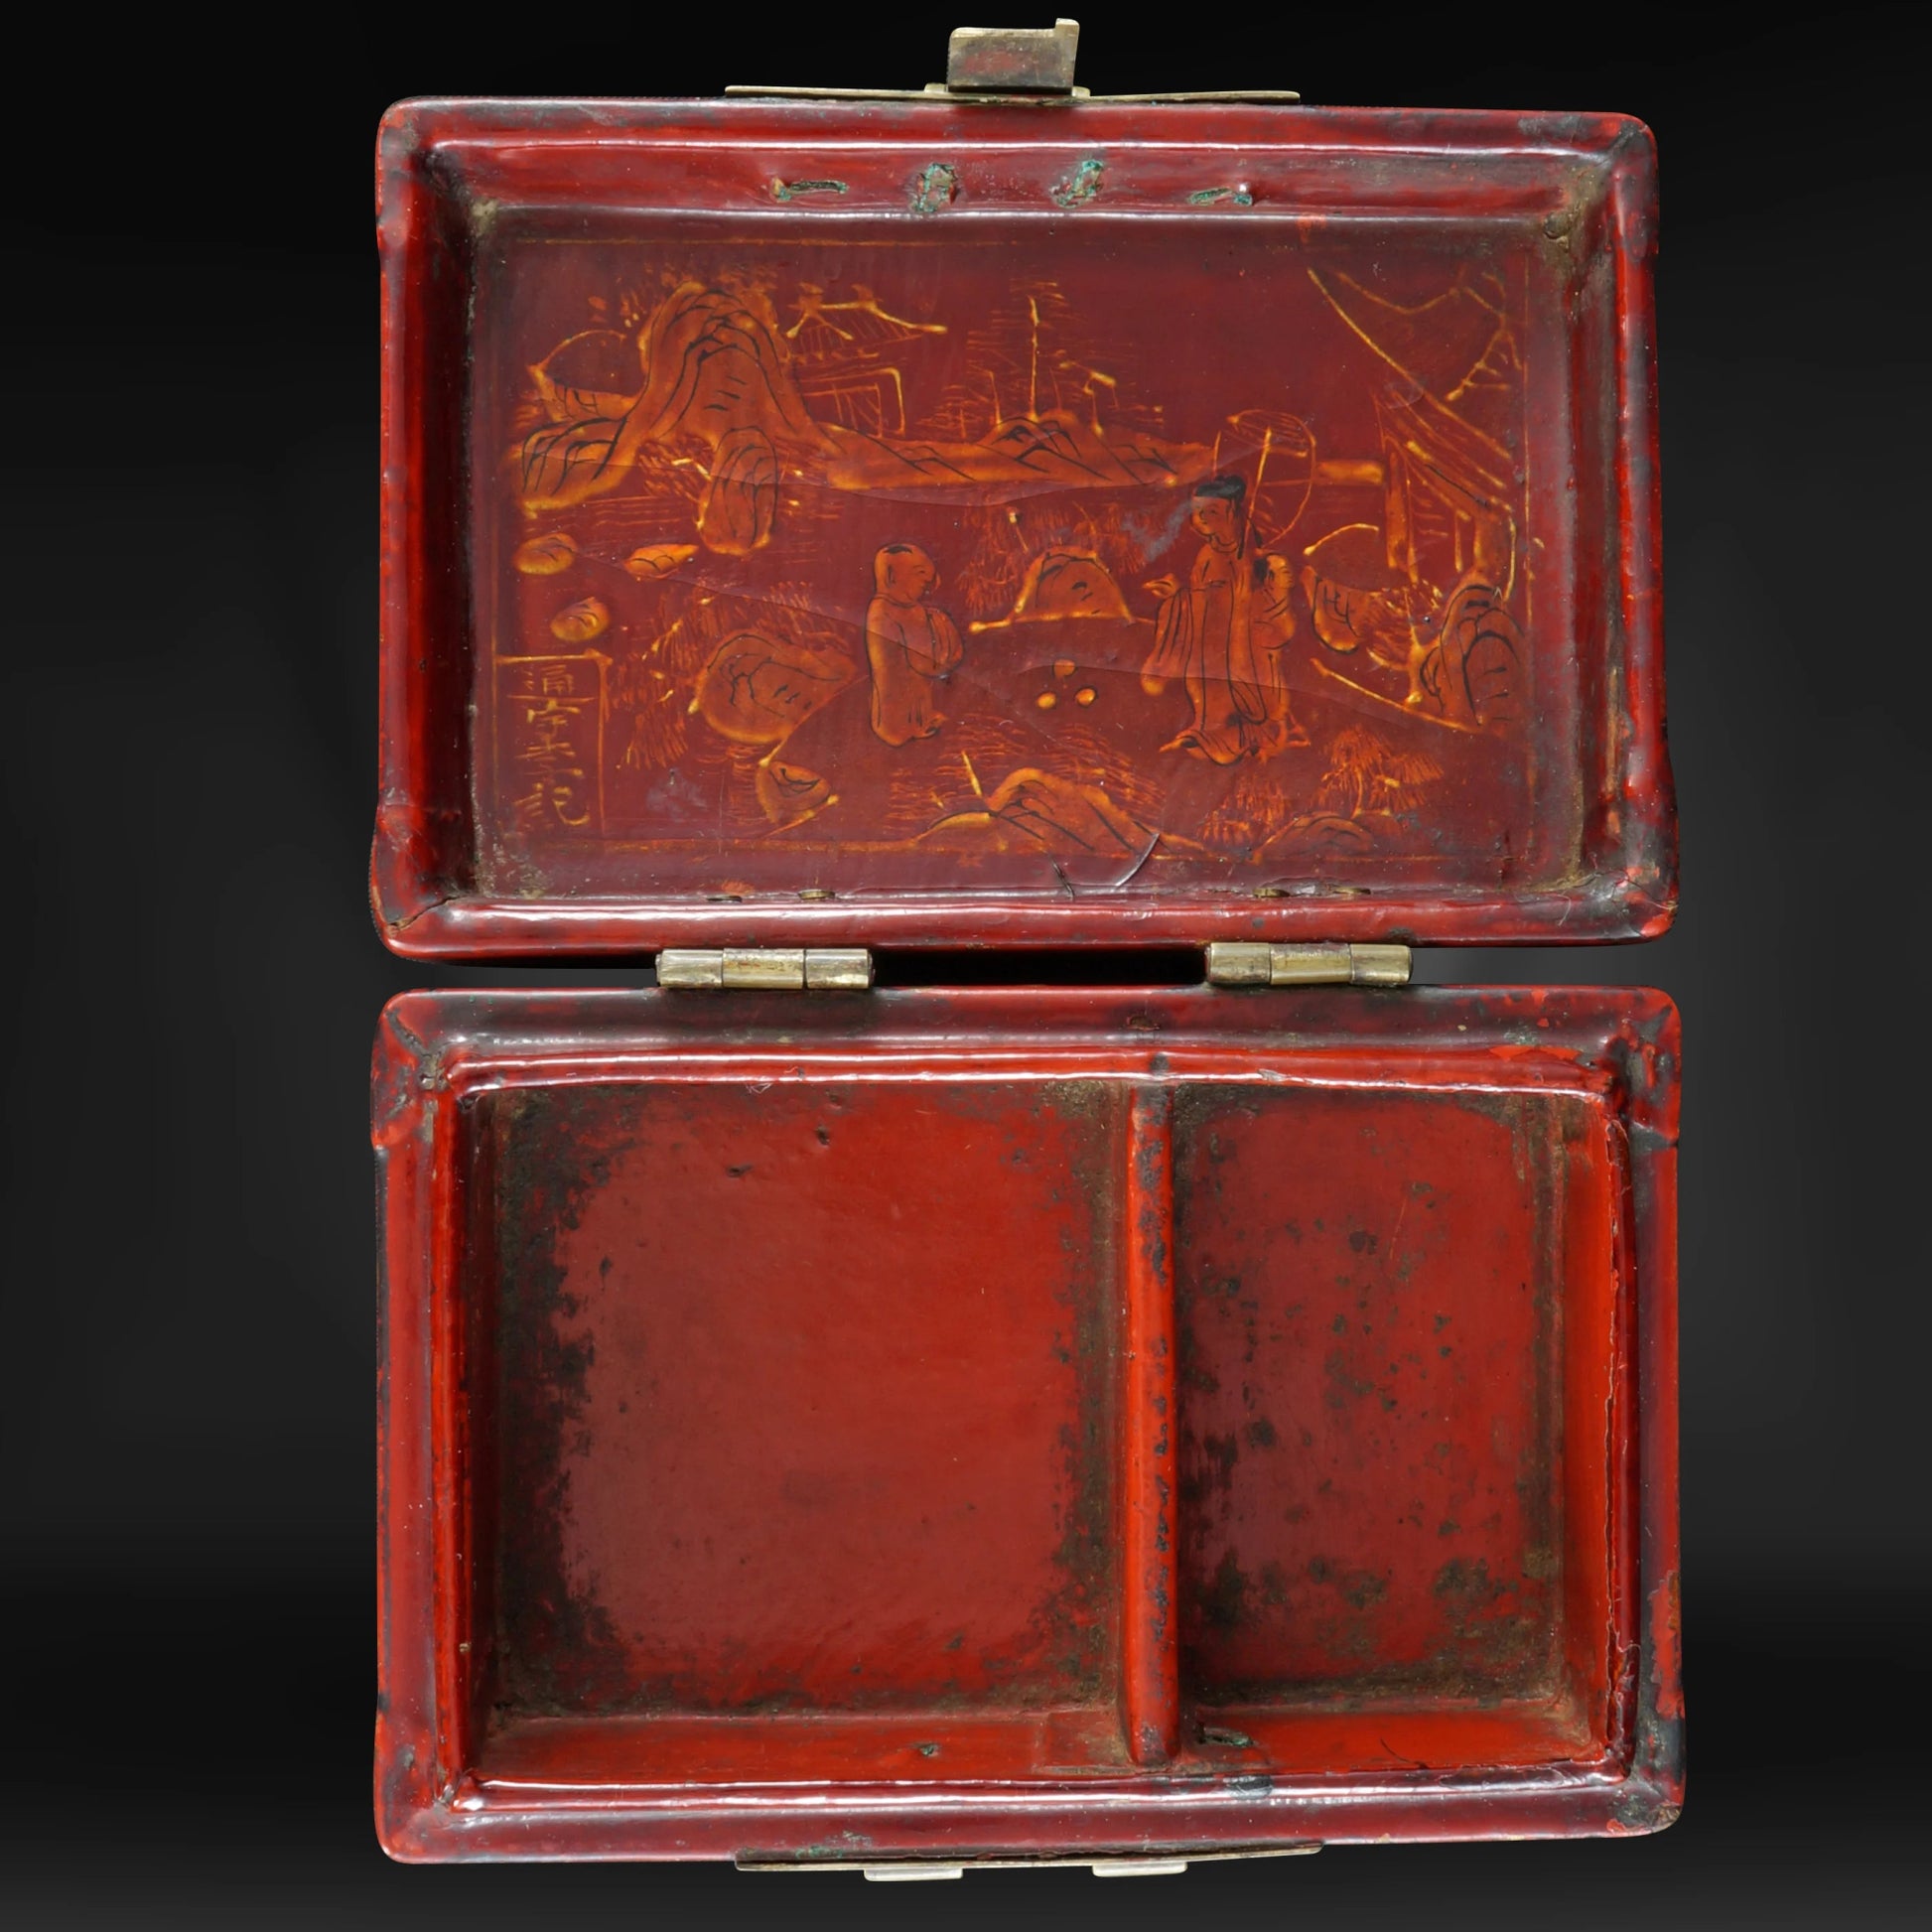 Antique Chinese Red and Gold Lacquer Box Circa 1900 - Bear and Raven Antiques